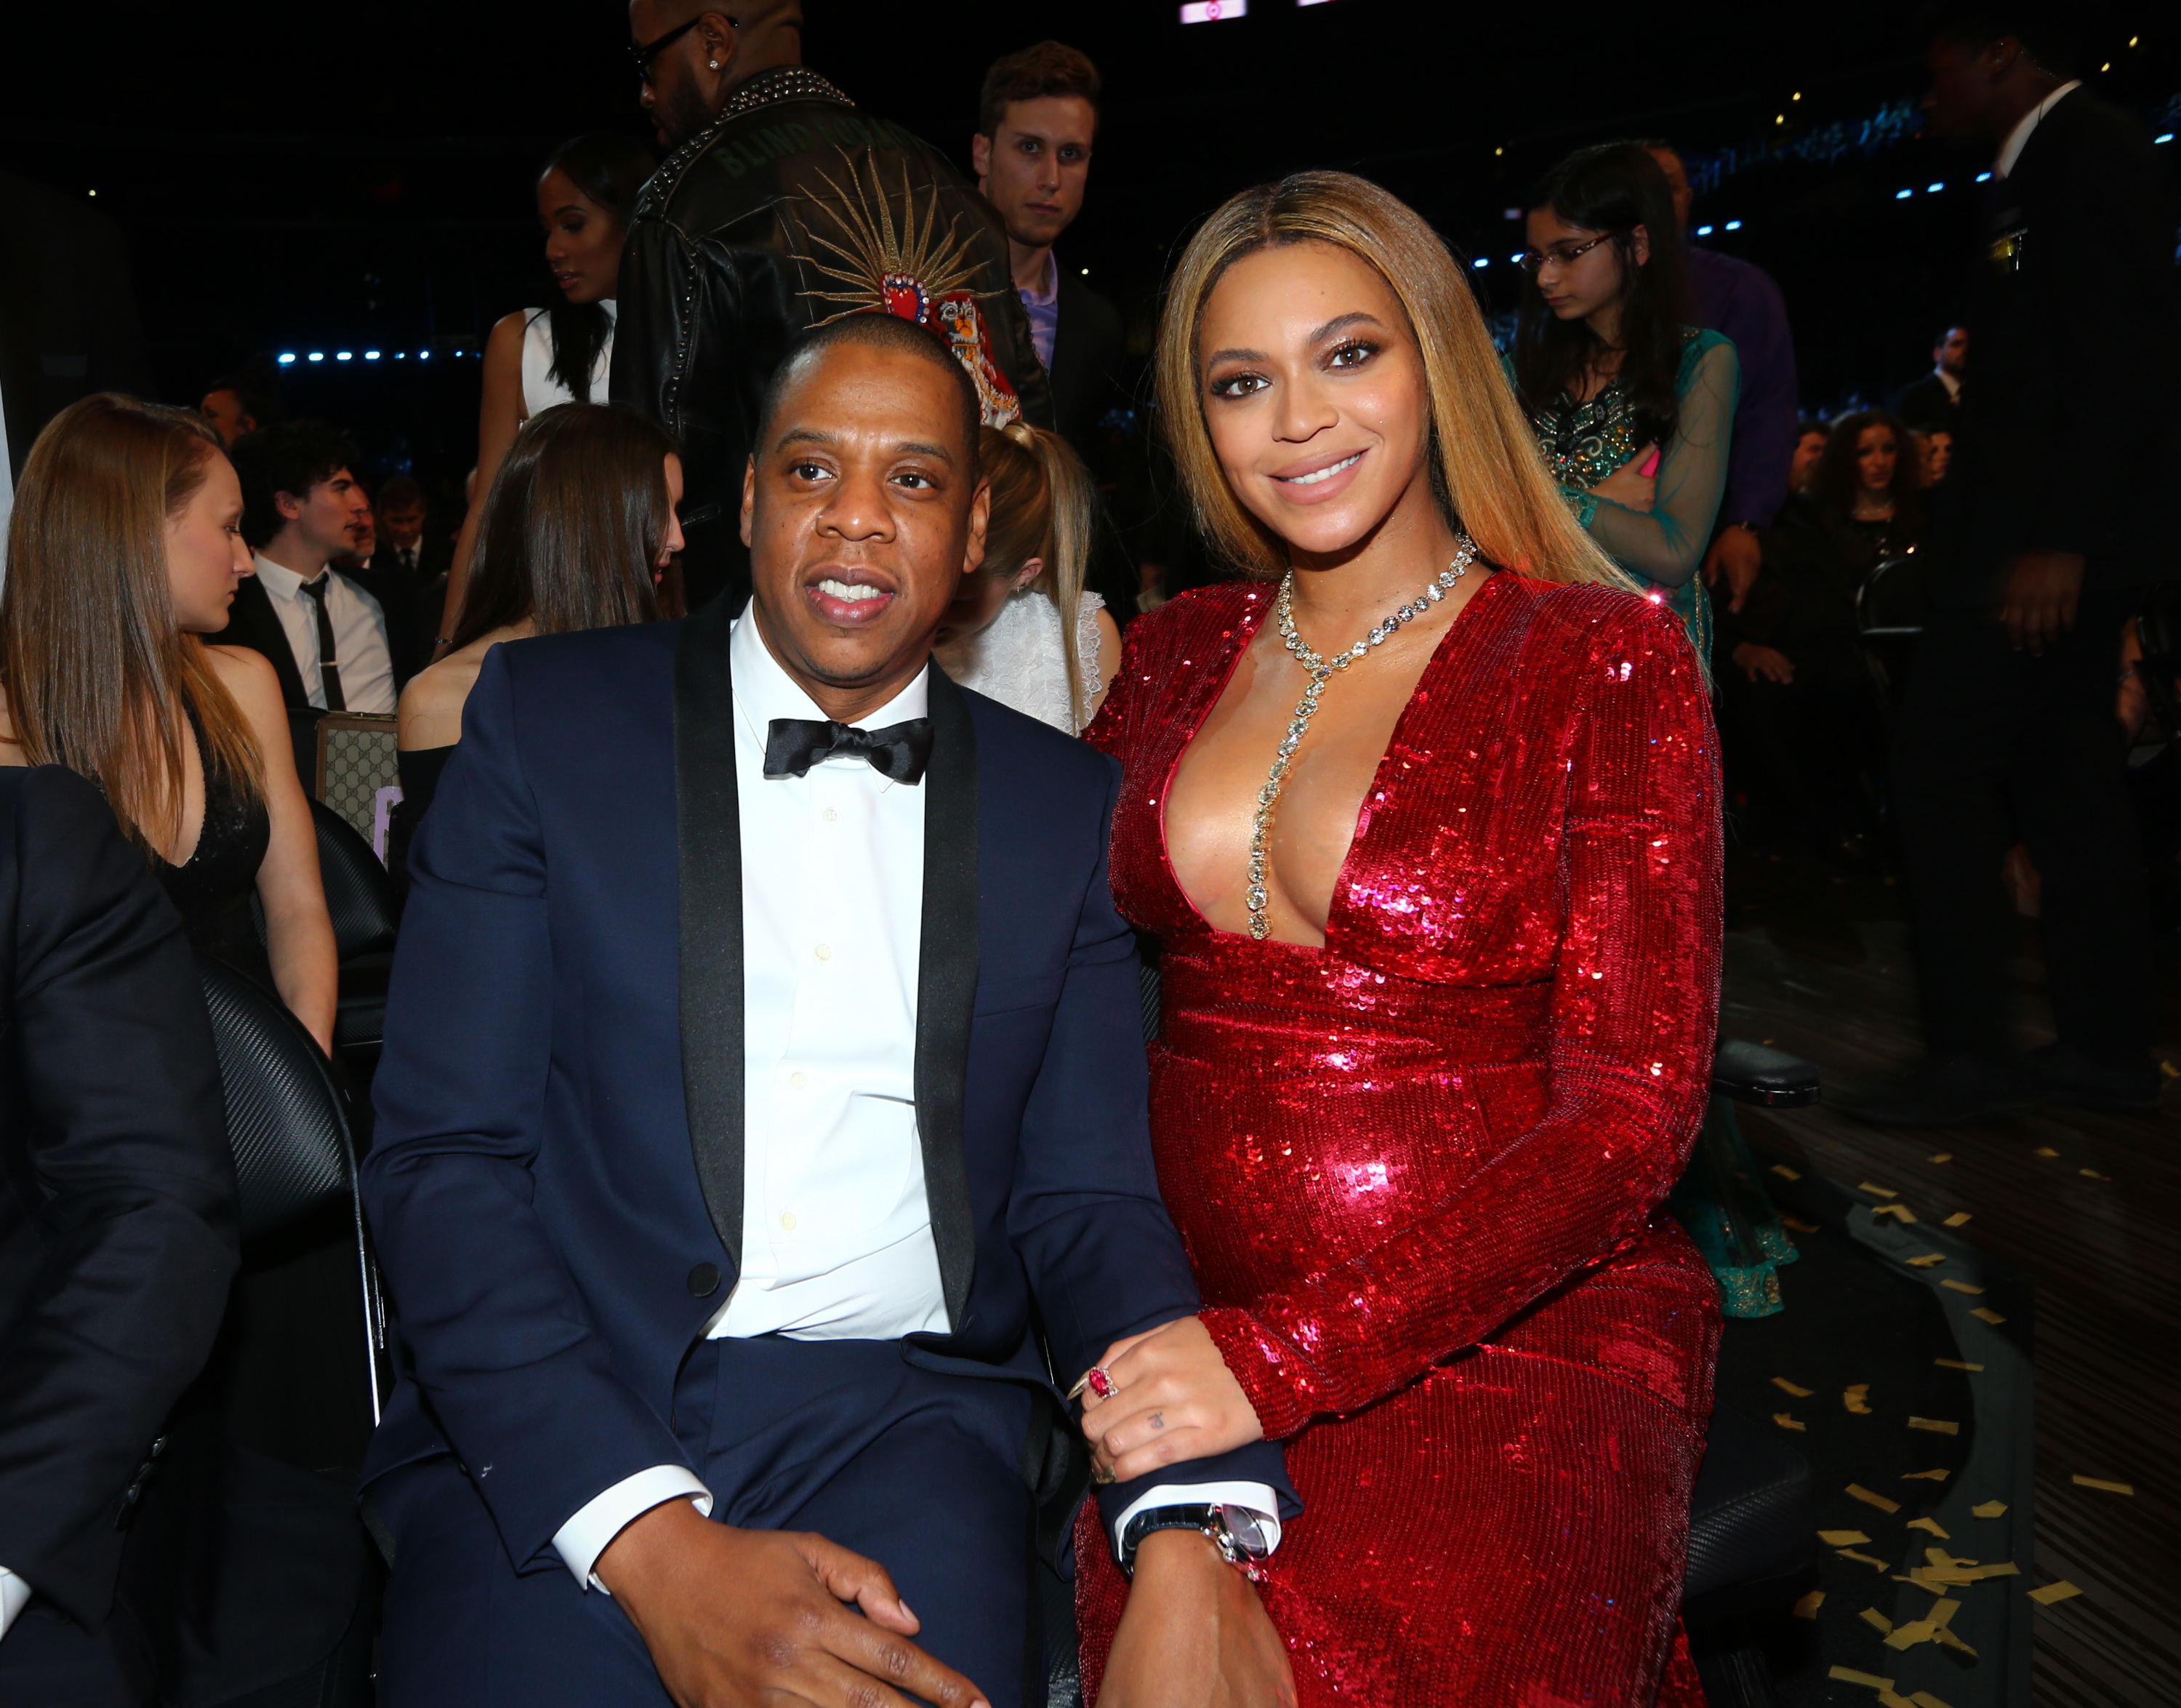 Here Are The Reported Names Of Beyonce and JayZ's Twins